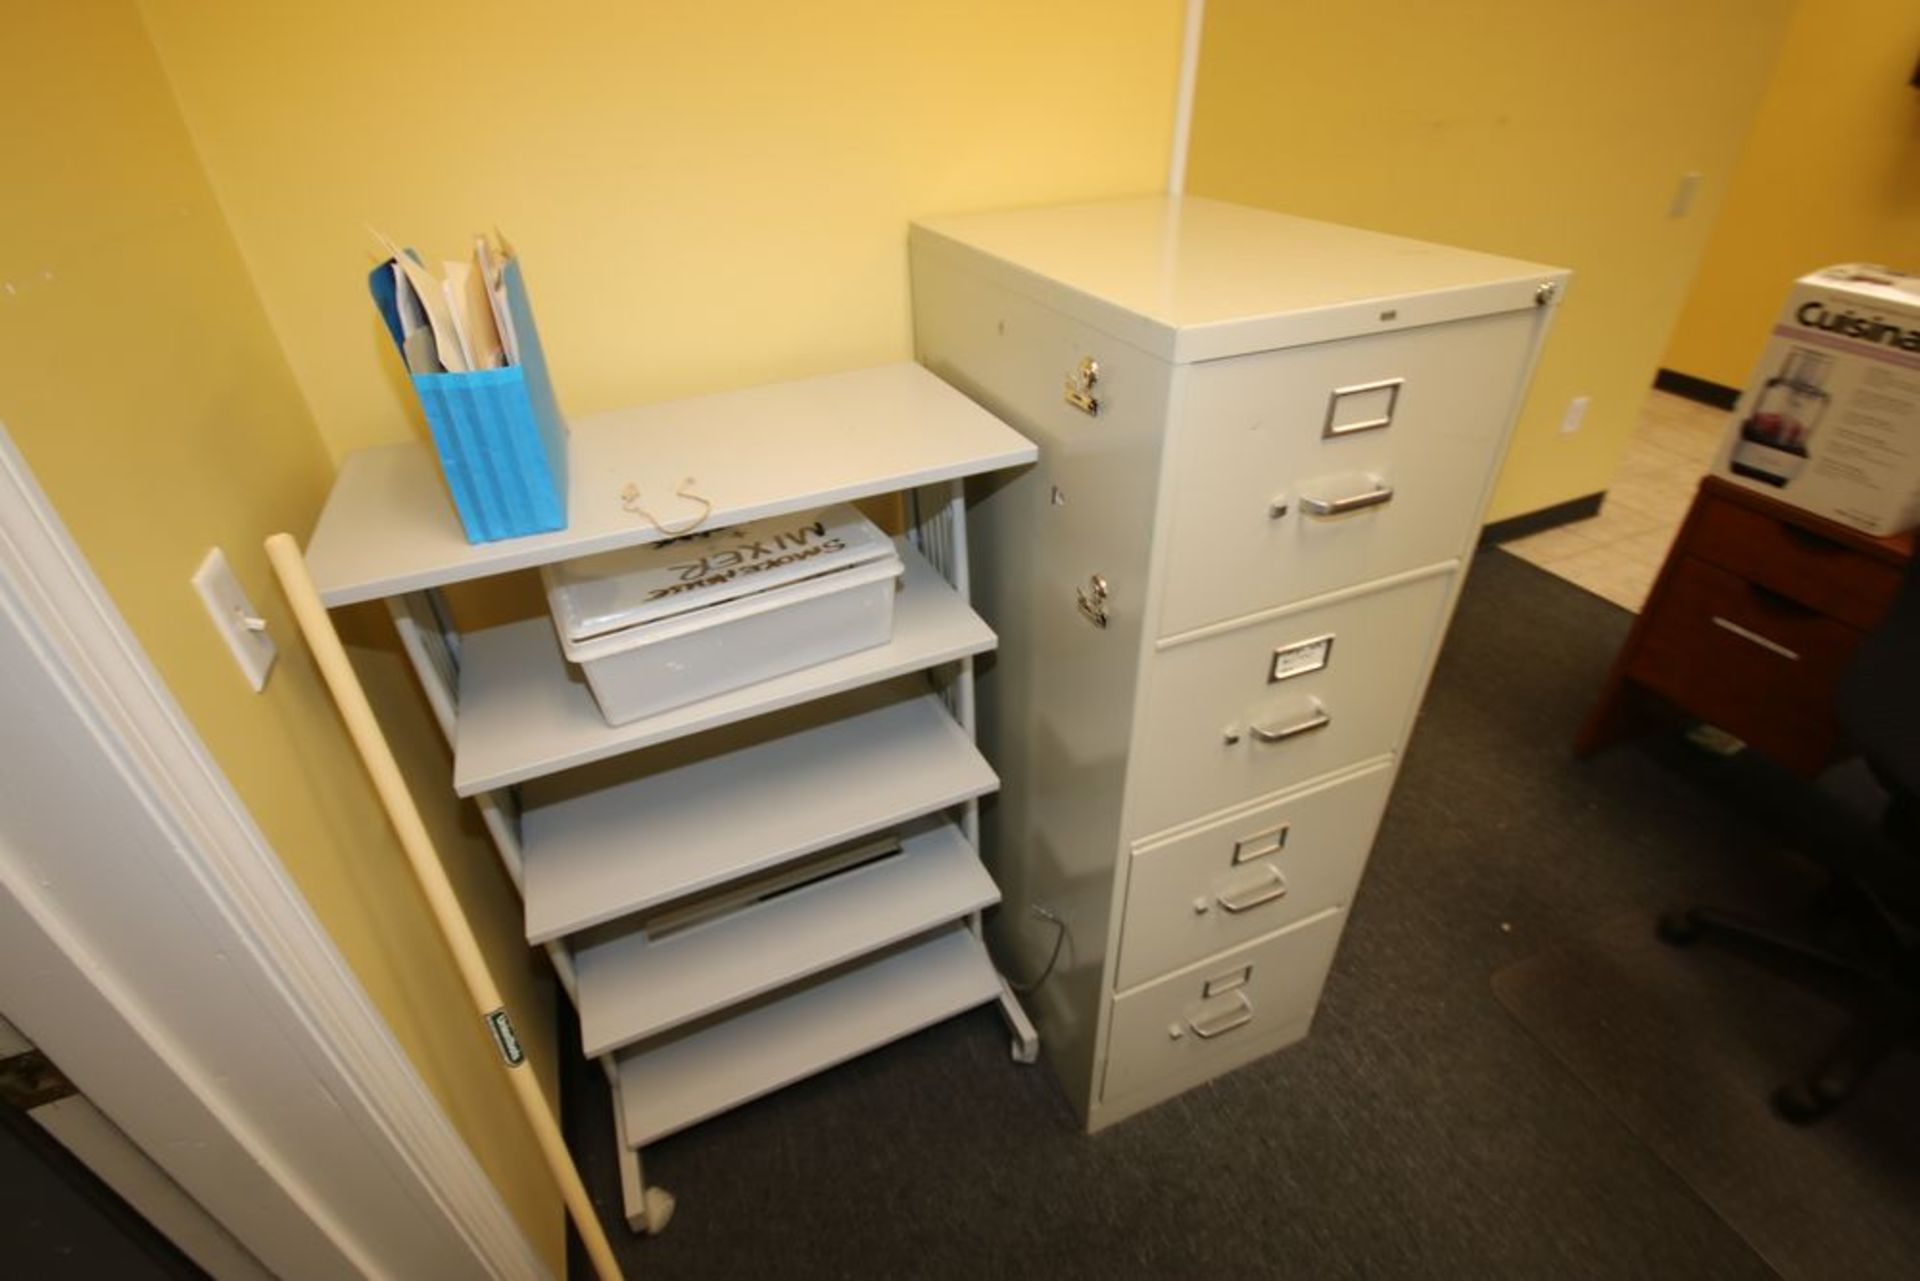 Contents of Storage Room, Include (3) Portable Wire Shelves, NEW Aprons, Silverware Dispensers, - Image 4 of 4